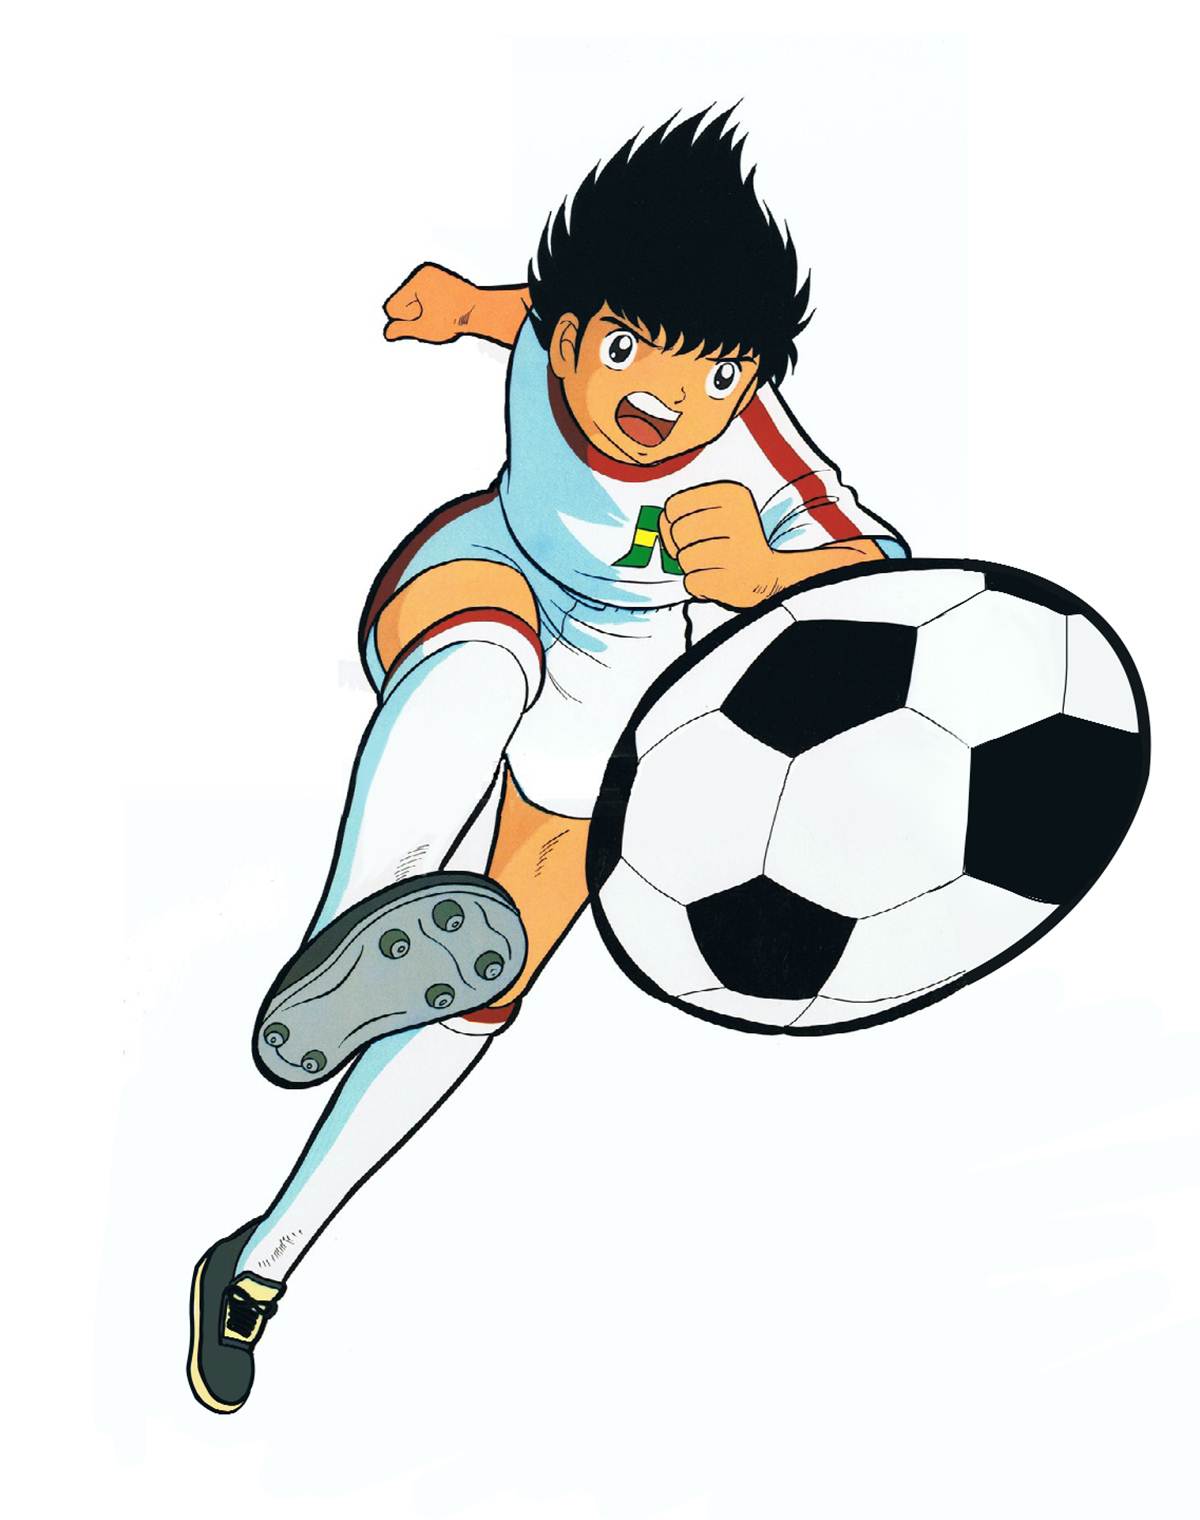 Why Netflix Needs to Pick Up Soccer Animes Ao Ashi  Blue Lock in 2022   Whats on Netflix